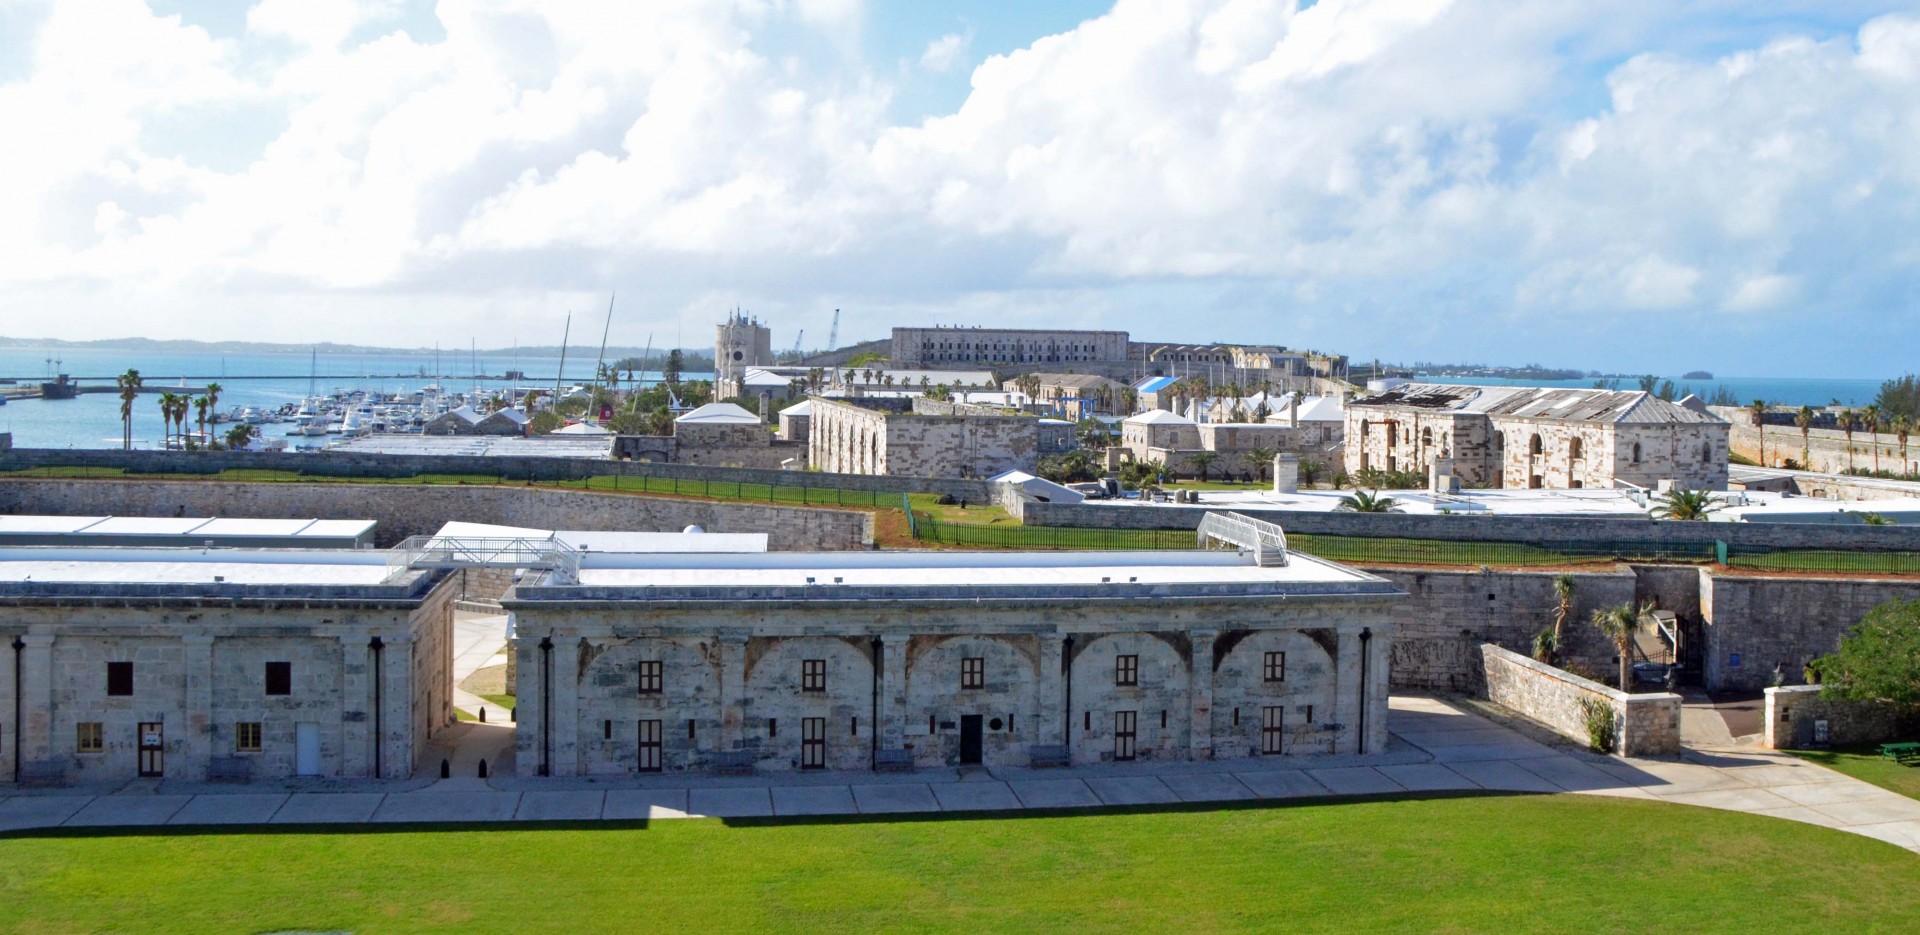 Royal Naval Dockyard from Commissioner's House